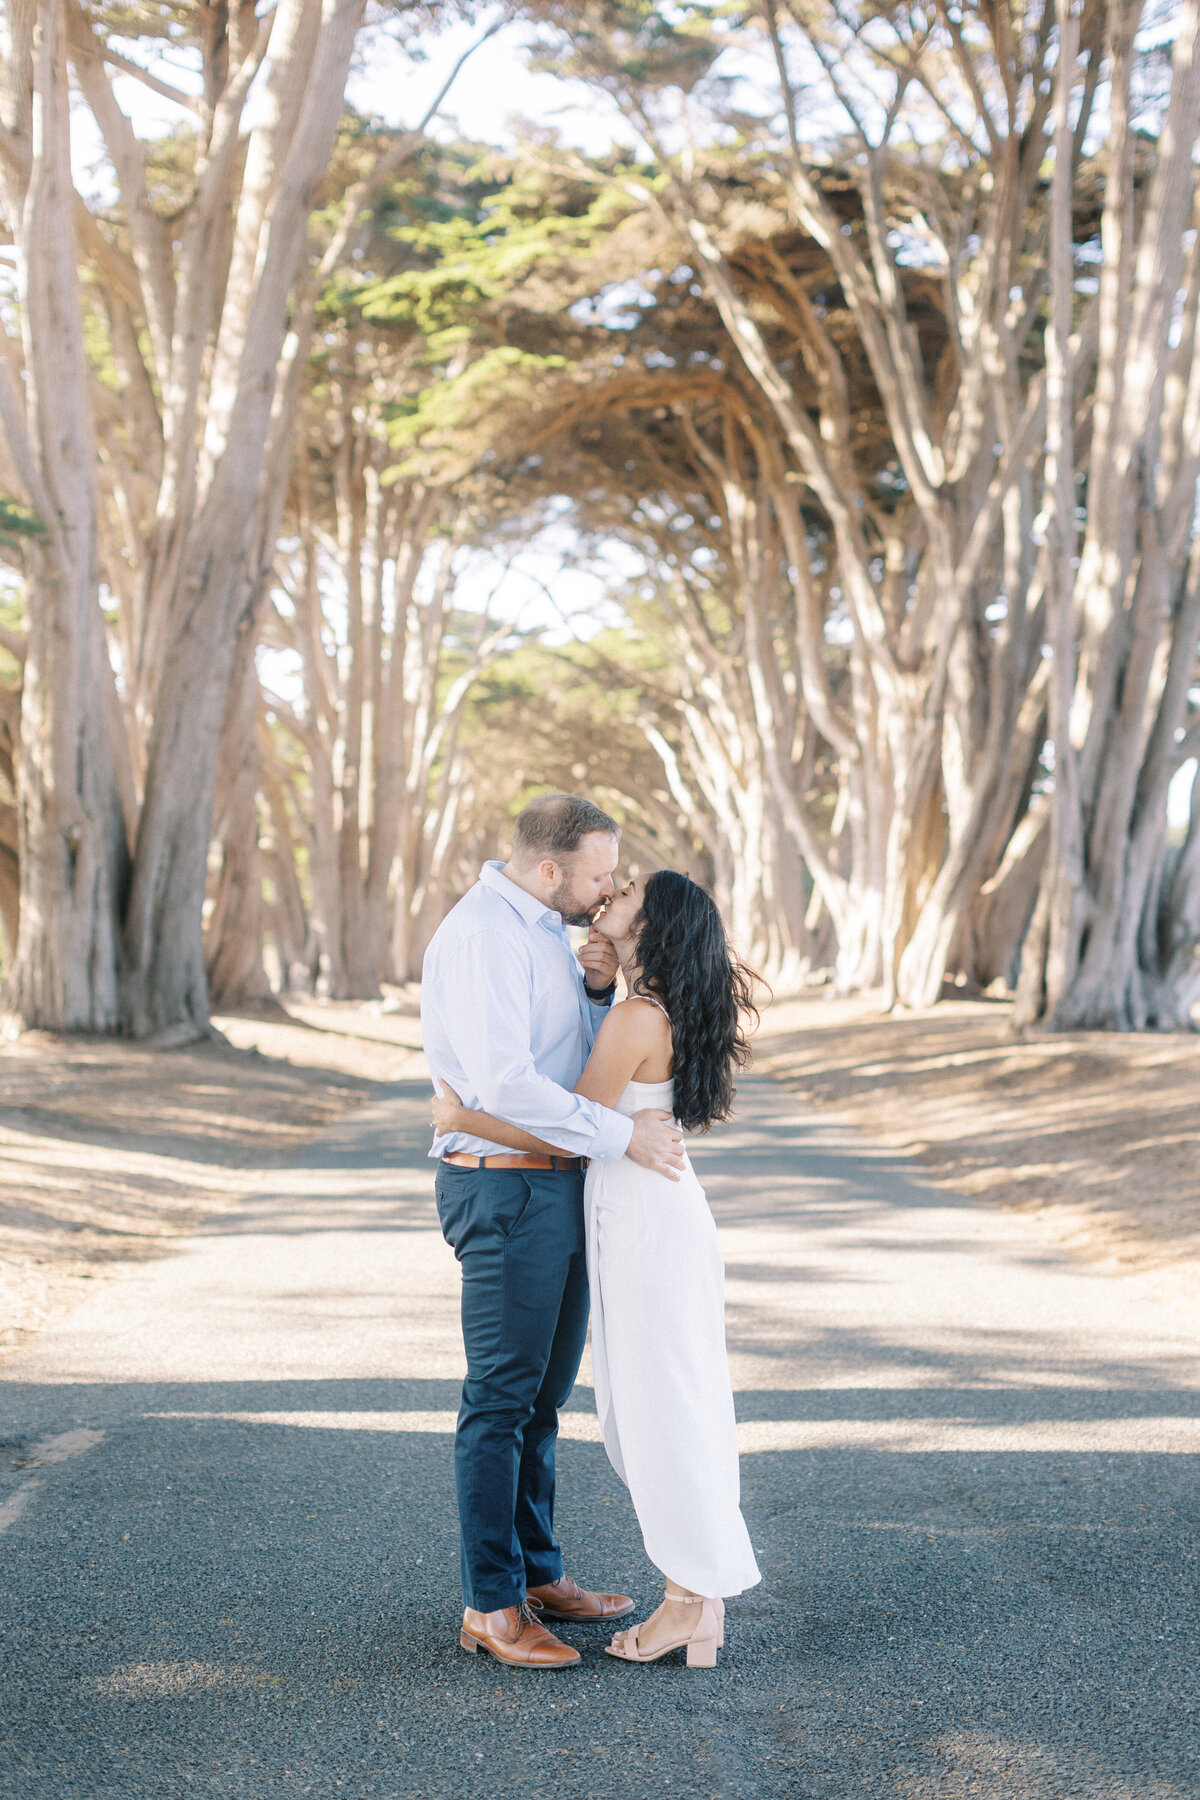 Shawn and Lisa | Photographer Favs | Cypress Tree Tunnel Engagement Session | Point Reyes, Ca-3